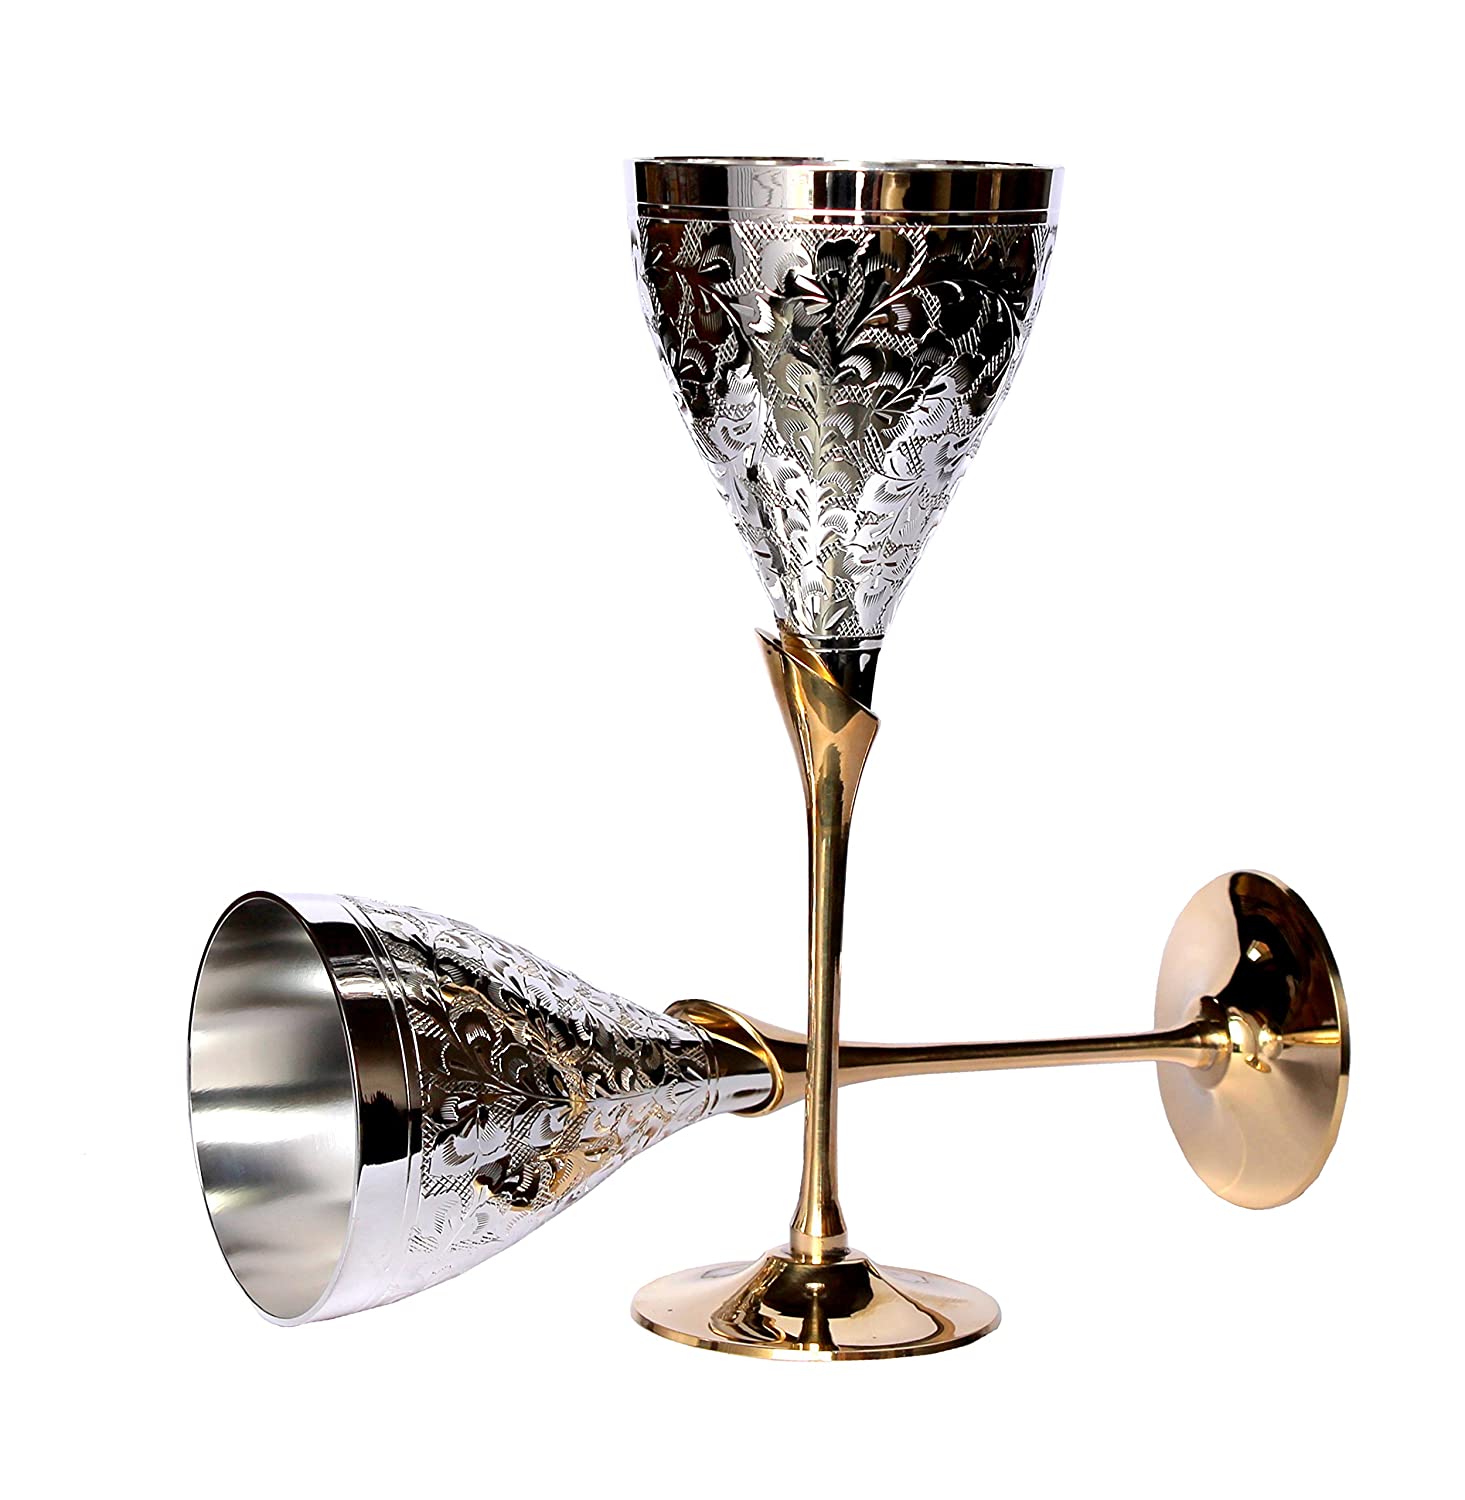 Splendor in the Sand Stainless Steel Champagne Flute - McClard's Gifts